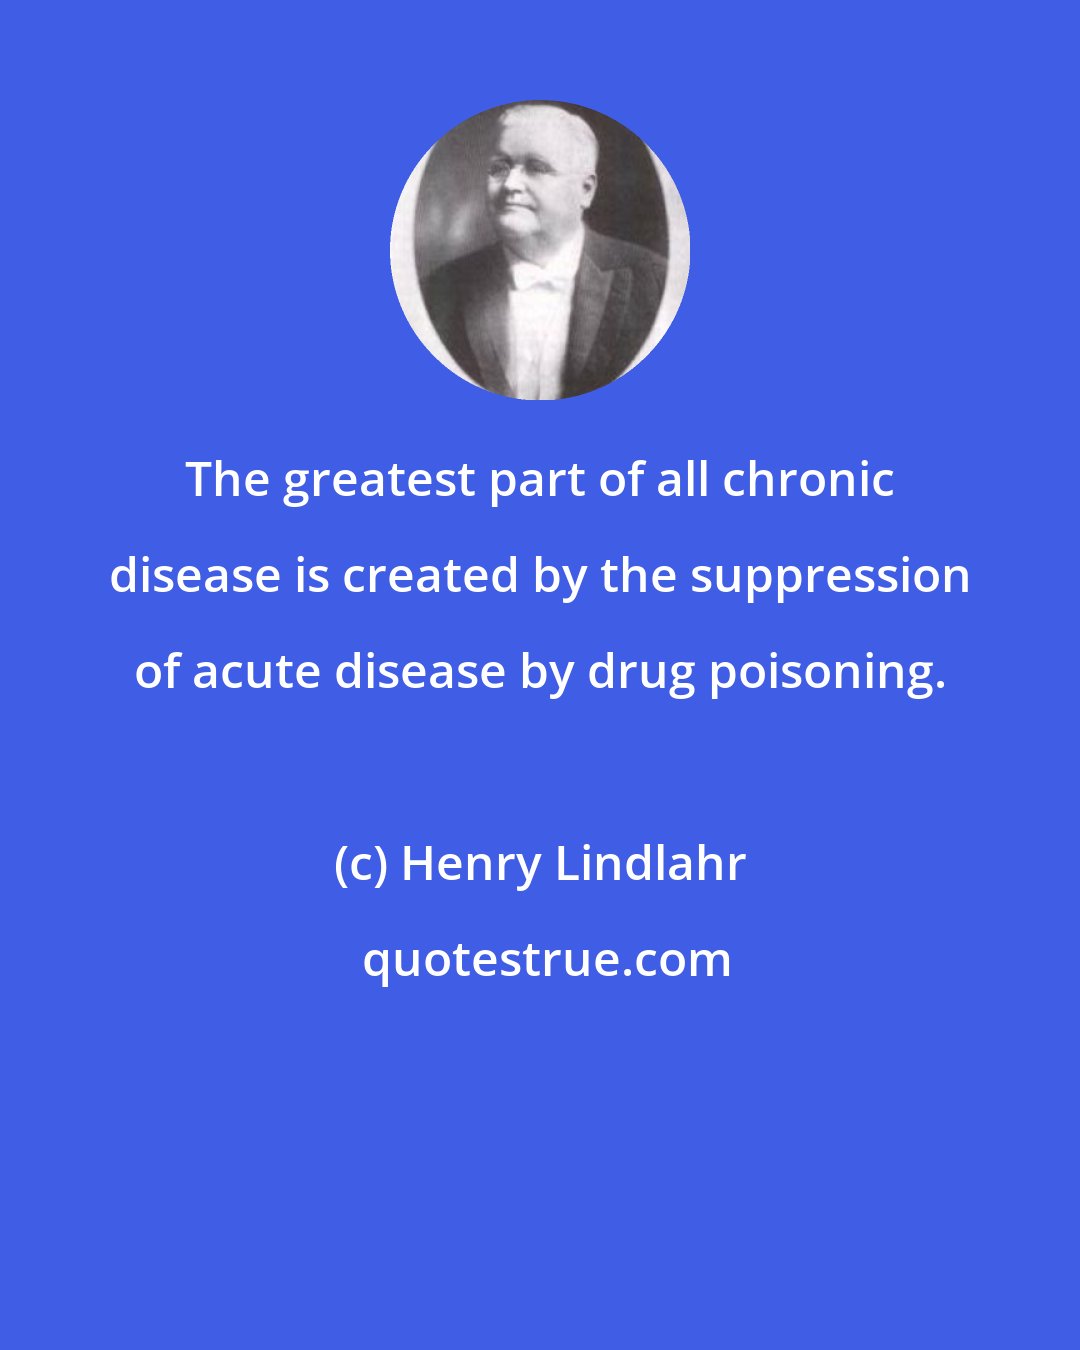 Henry Lindlahr: The greatest part of all chronic disease is created by the suppression of acute disease by drug poisoning.